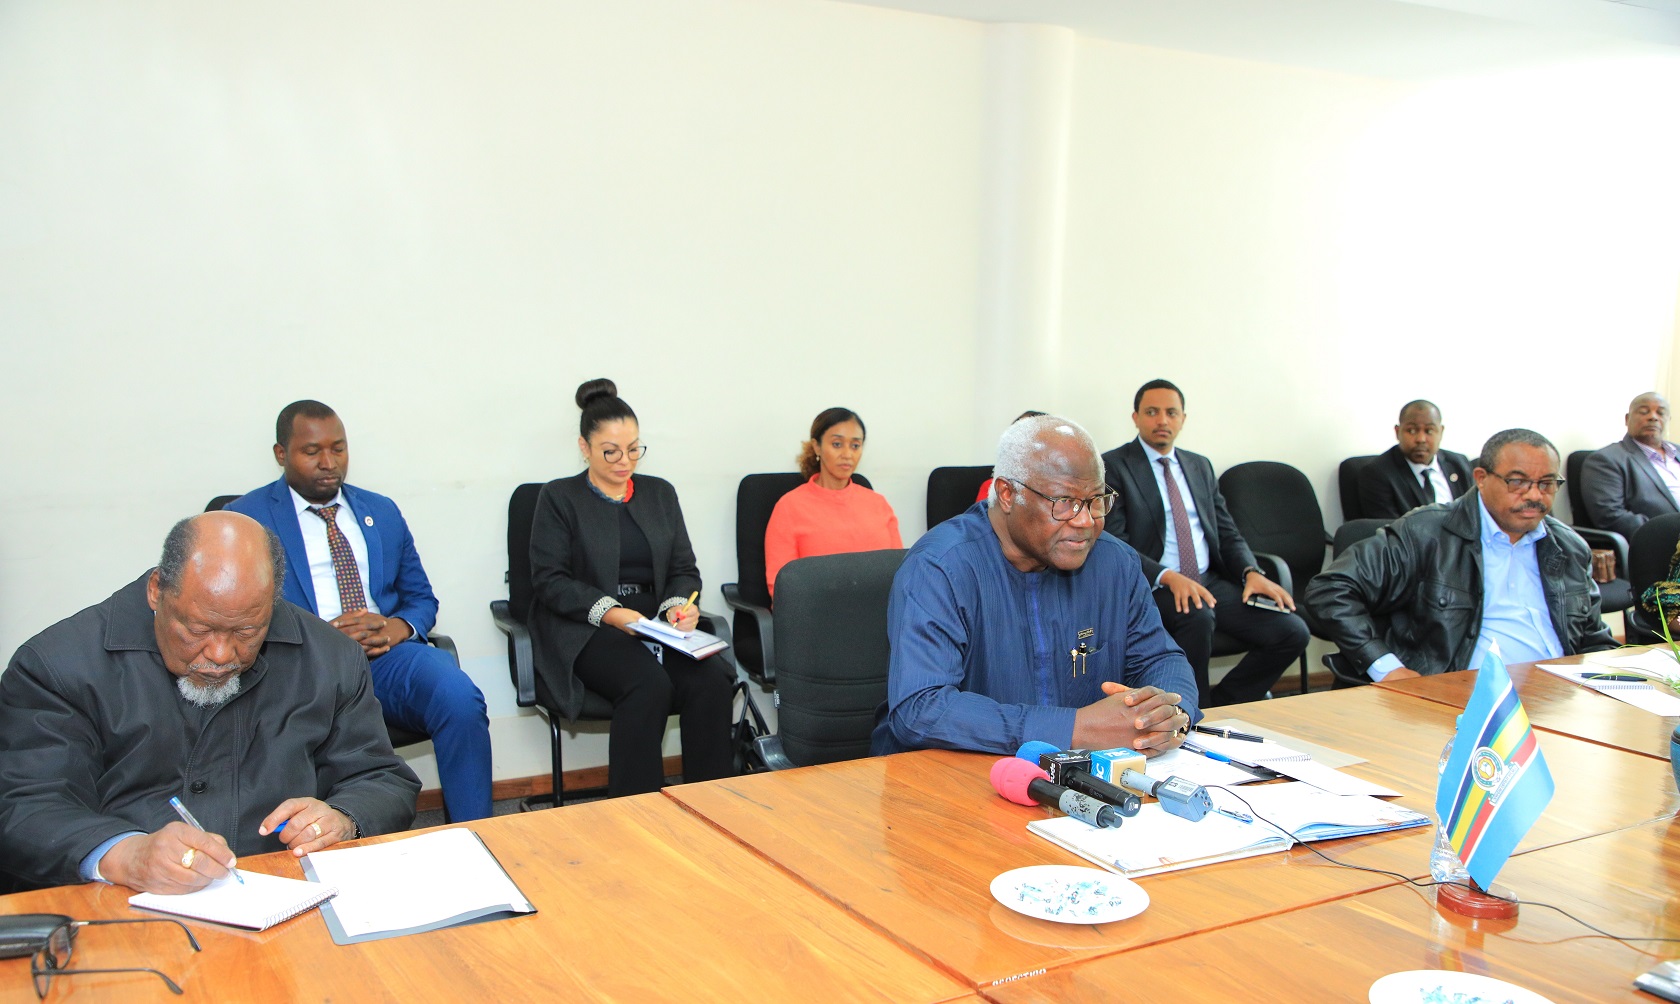 The former President of Sierra Leone, Ernest Bai Koroma (centre) giving his remarks as he led a delegation during a visit to the EAC Headquarters. With H.E. Koroma are the former President of Mozambique, Joaquim Alberto Chissano (left) and the former Prime Minister of Ethiopia, H.E. Hailemariam Desalegn.